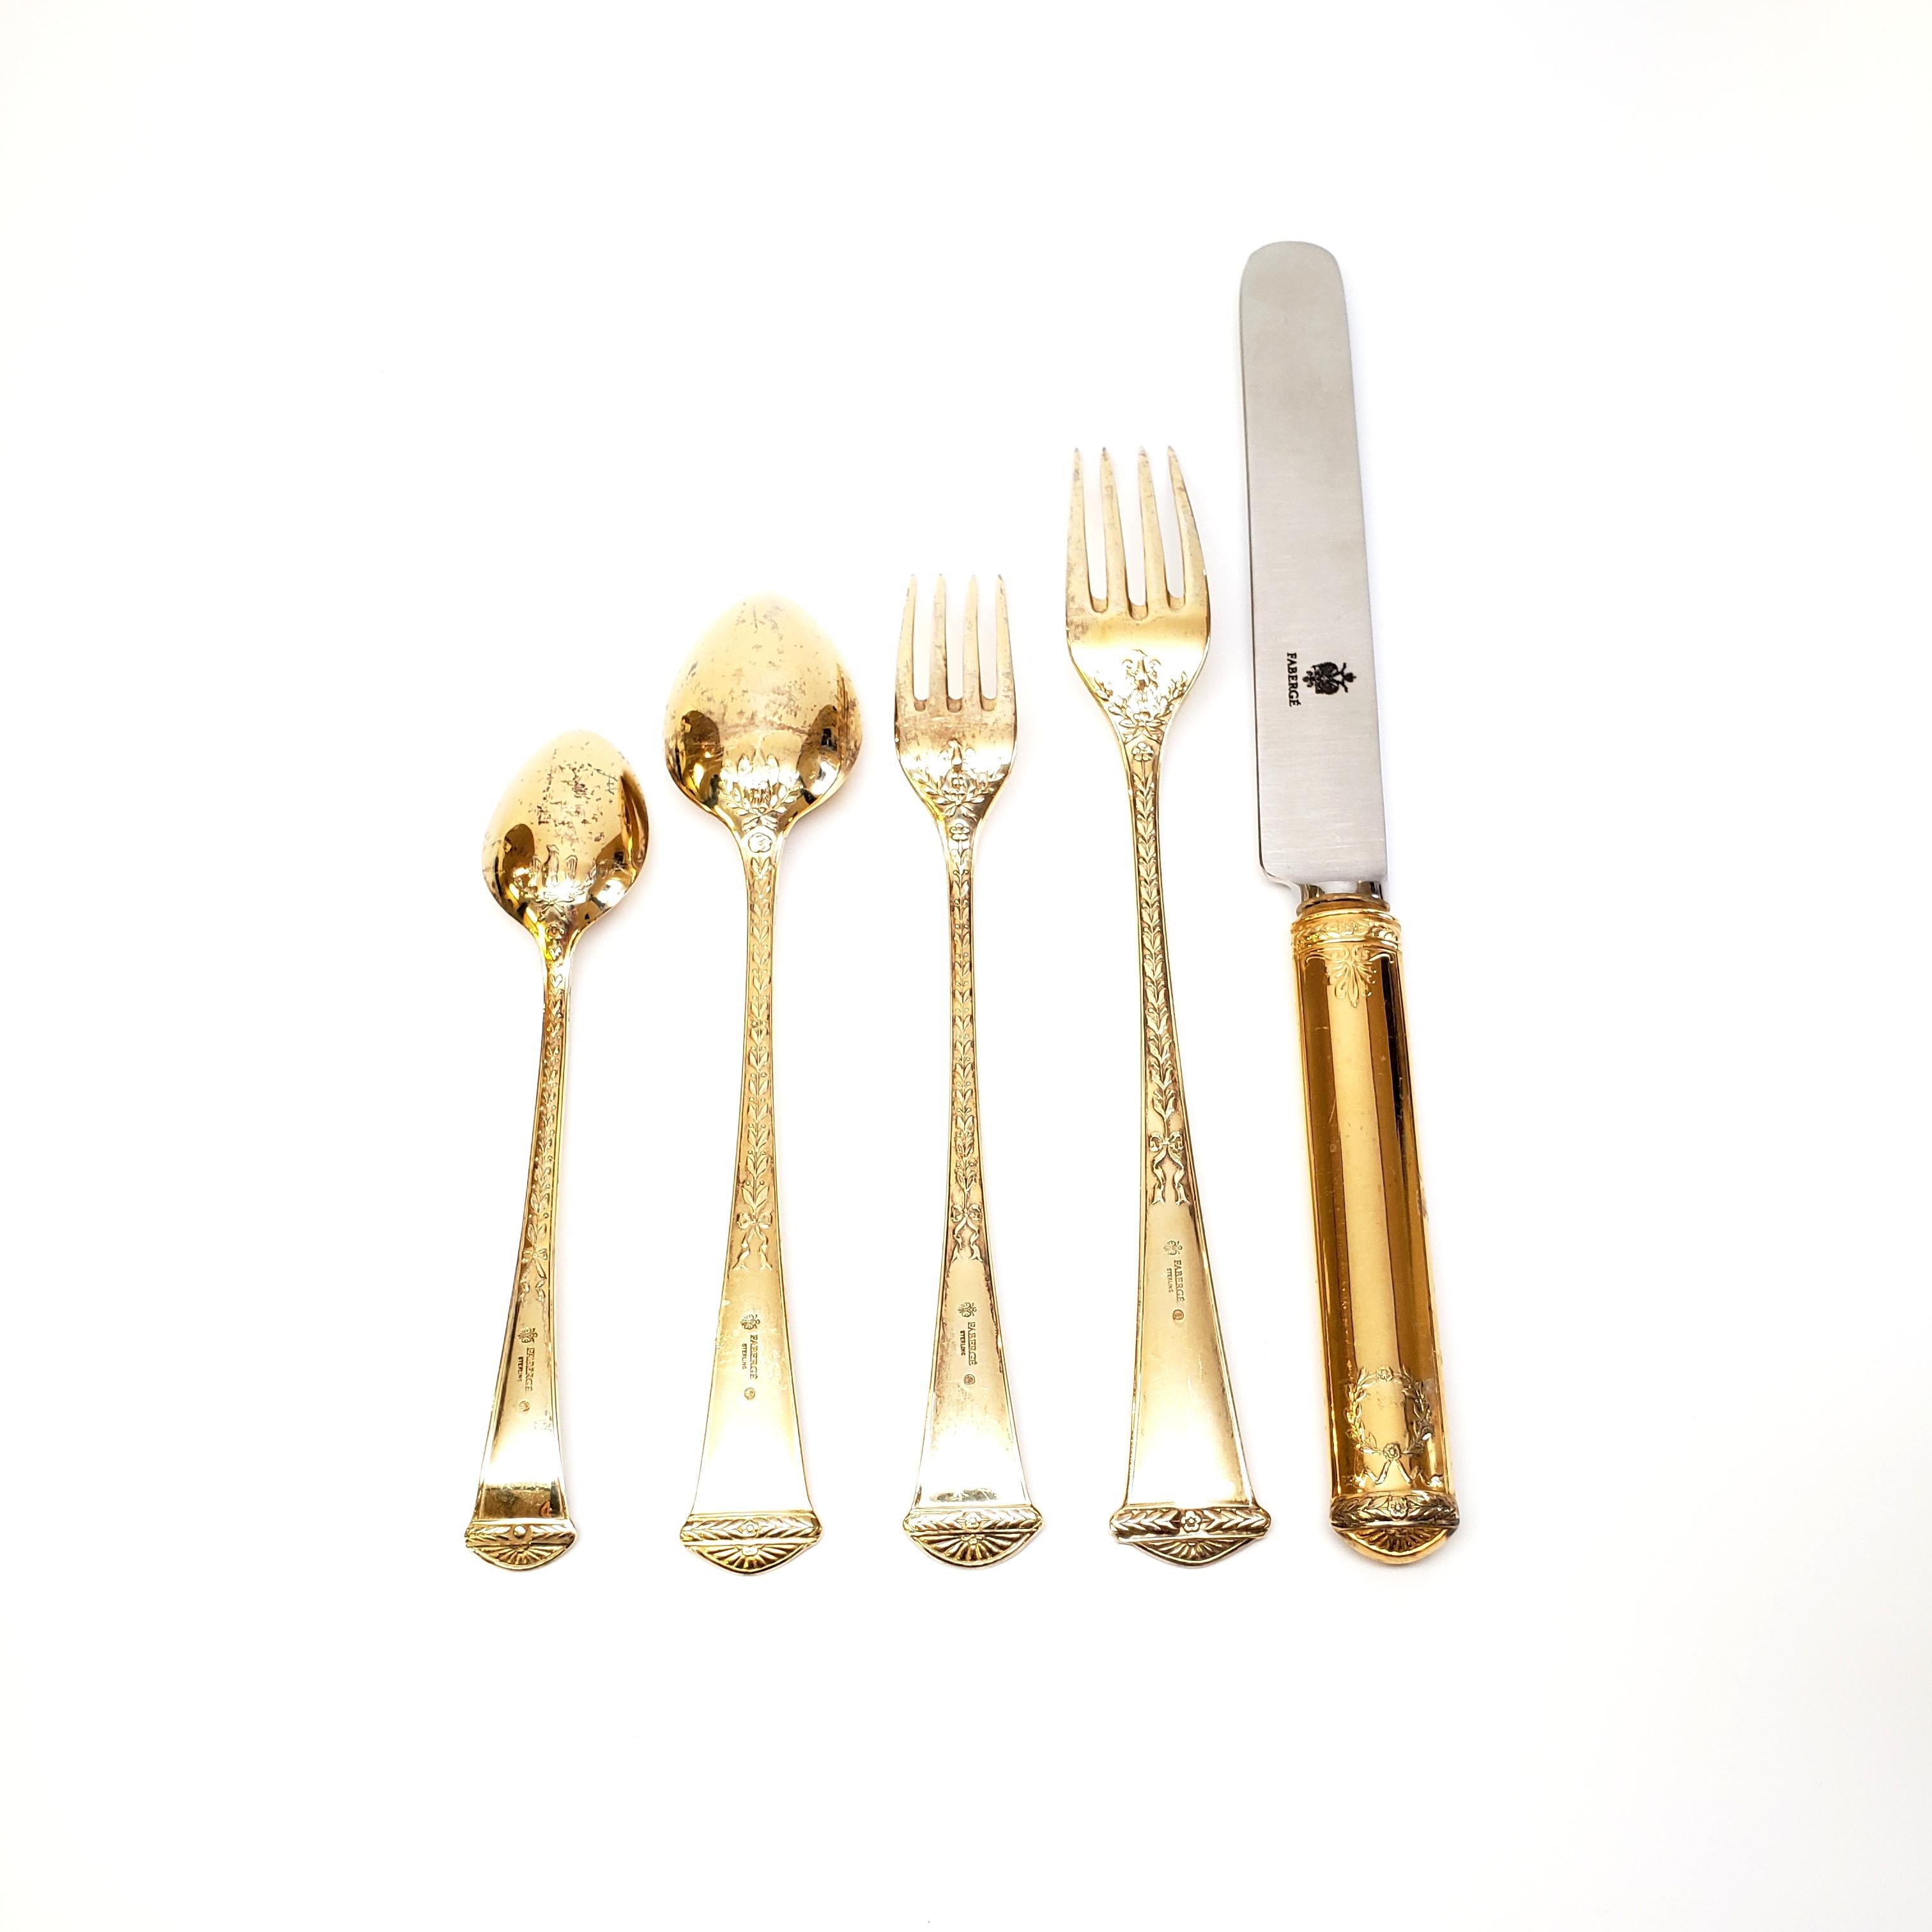 Gold vermeil over sterling silver 5pc place setting, by Faberge in the Imperial Court pattern. No monogram.

Faberge's now discontinued pattern features a wreath, an eagle and laurel leaves on both the front and back of each handle. This 5-piece